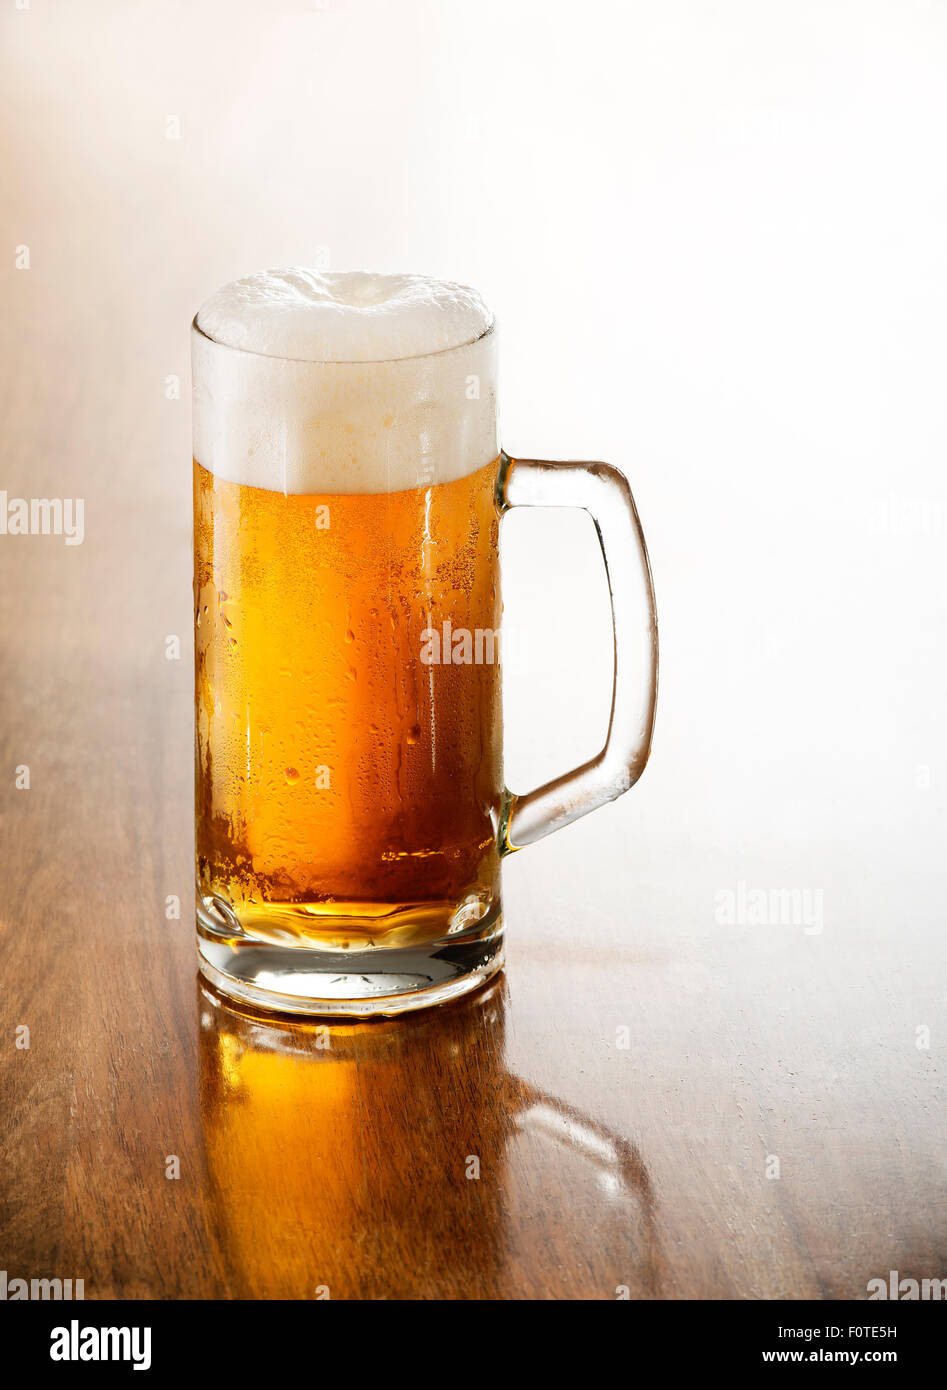 Glass of cold beer on a wooden table. Stock Photo